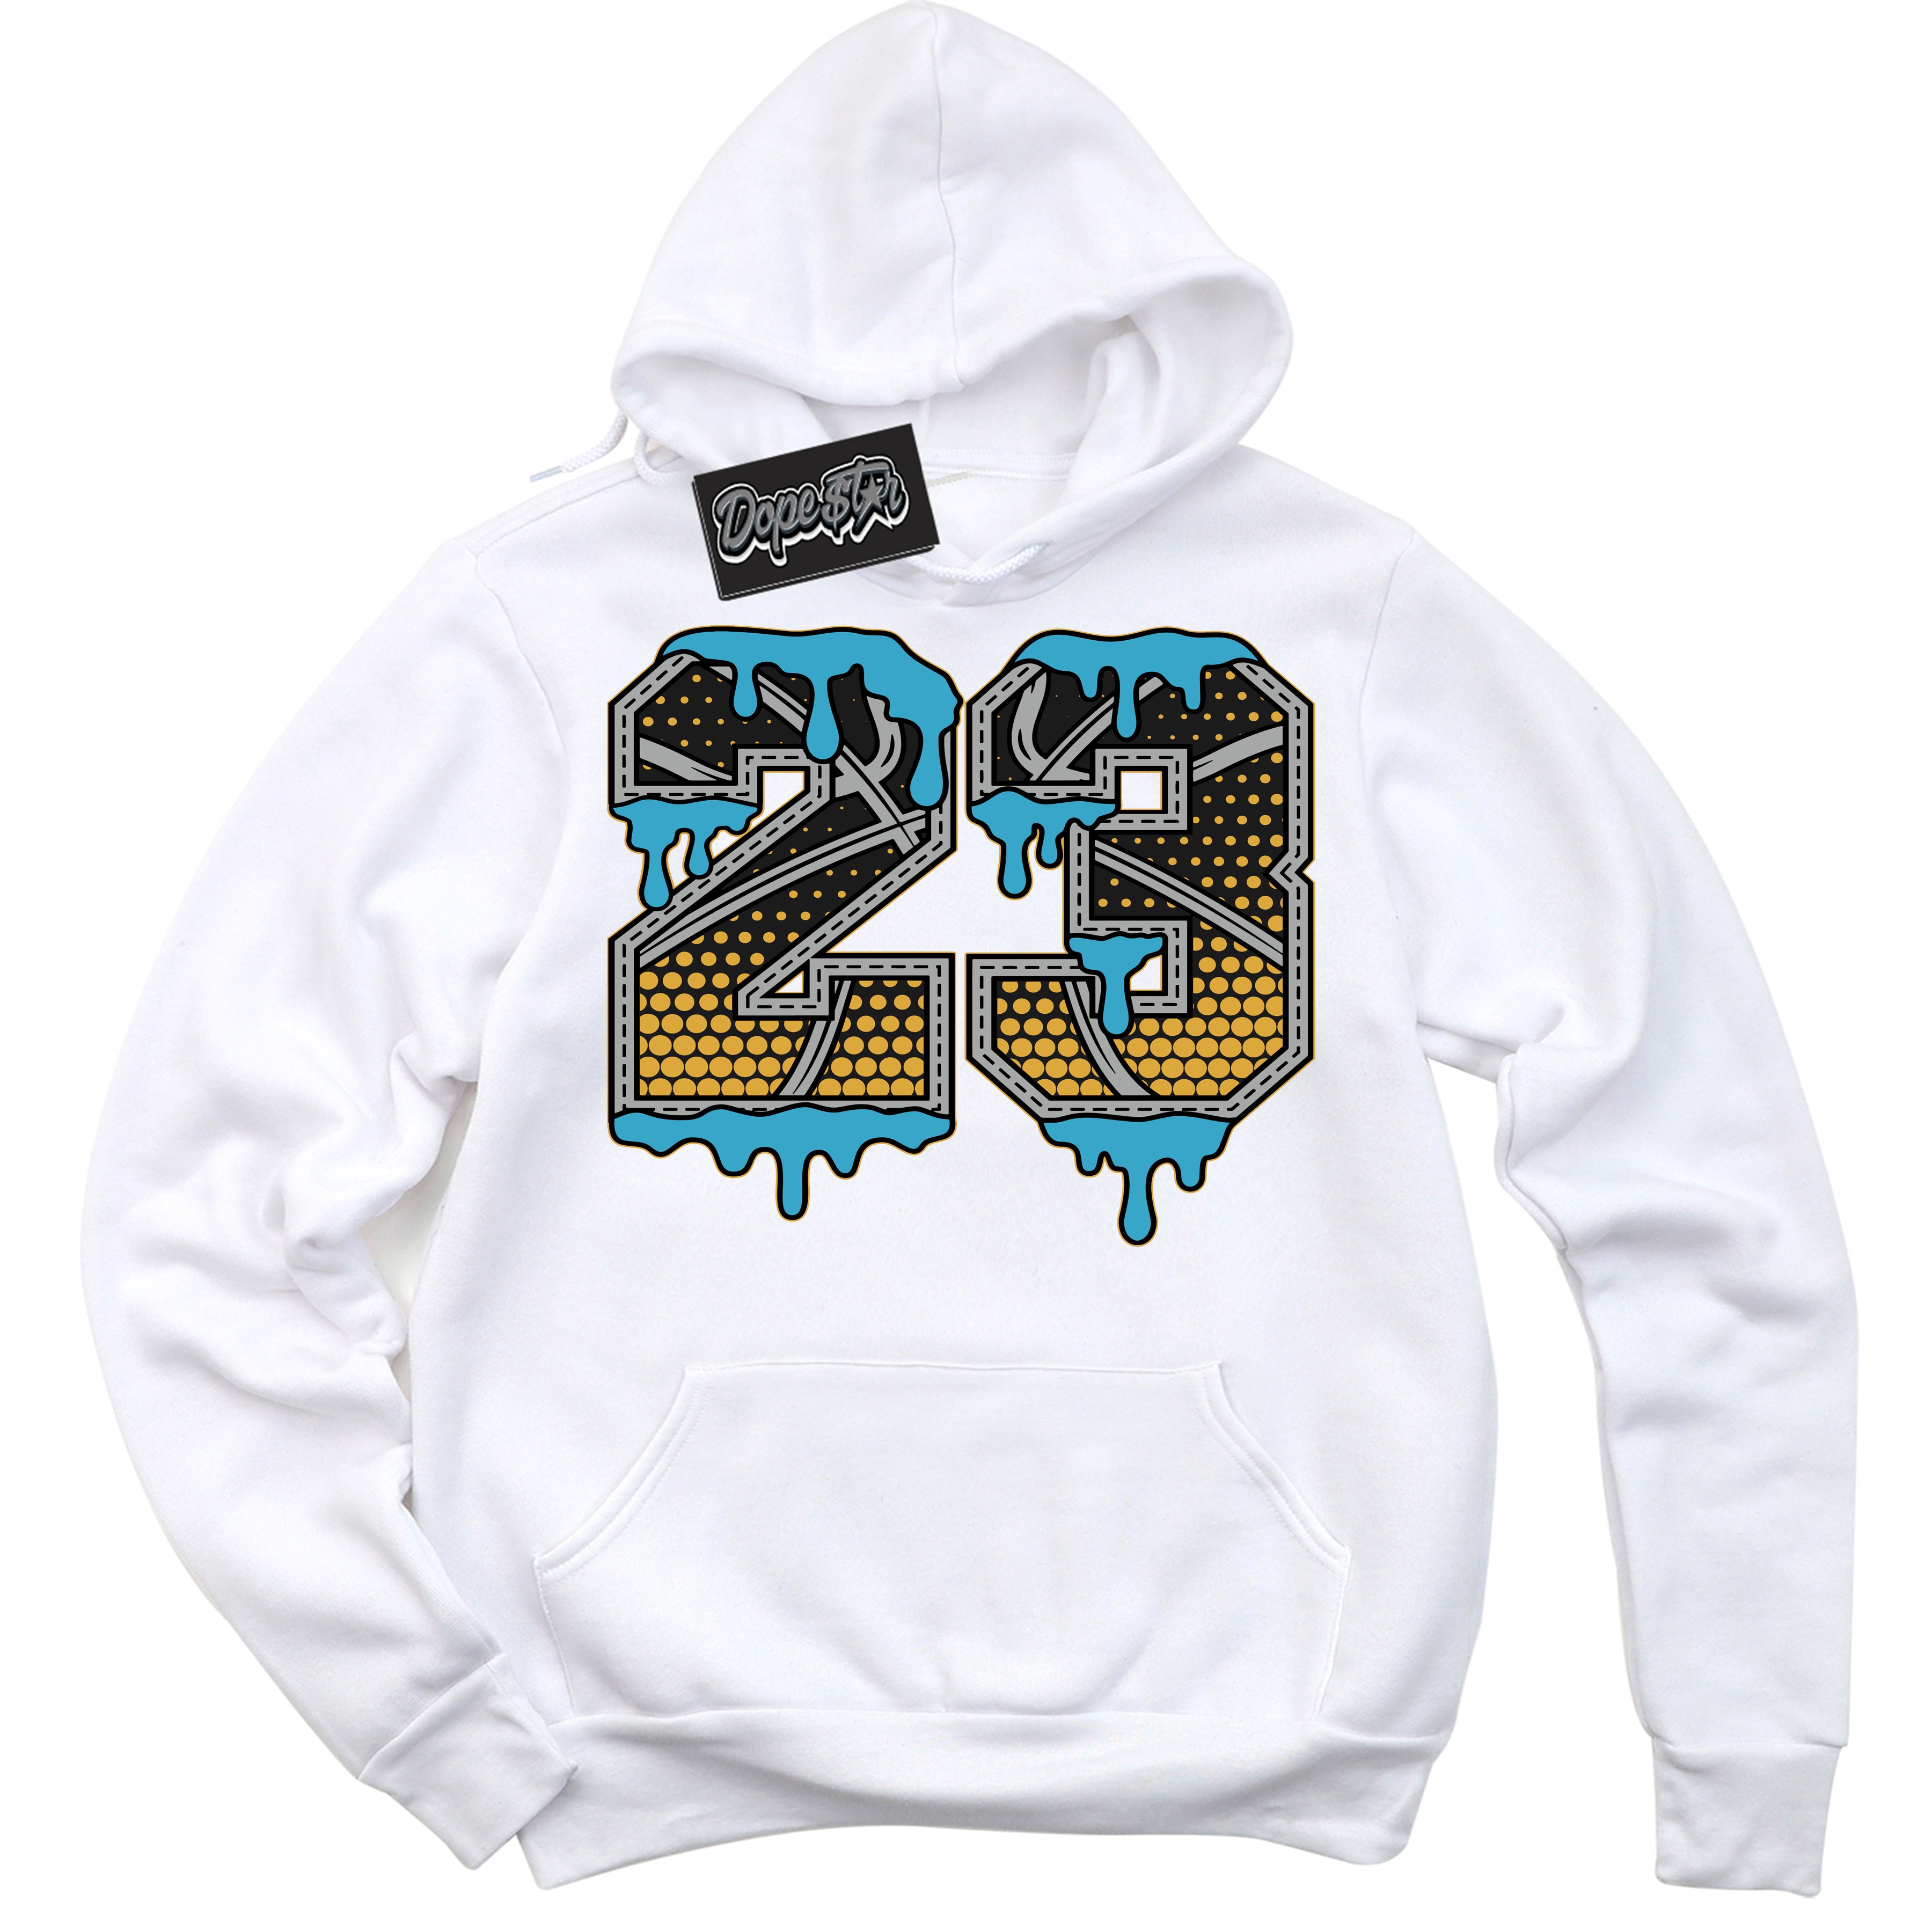 Cool White Hoodie with “ 23 Ball ”  design that Perfectly Matches Aqua 5s Sneakers.